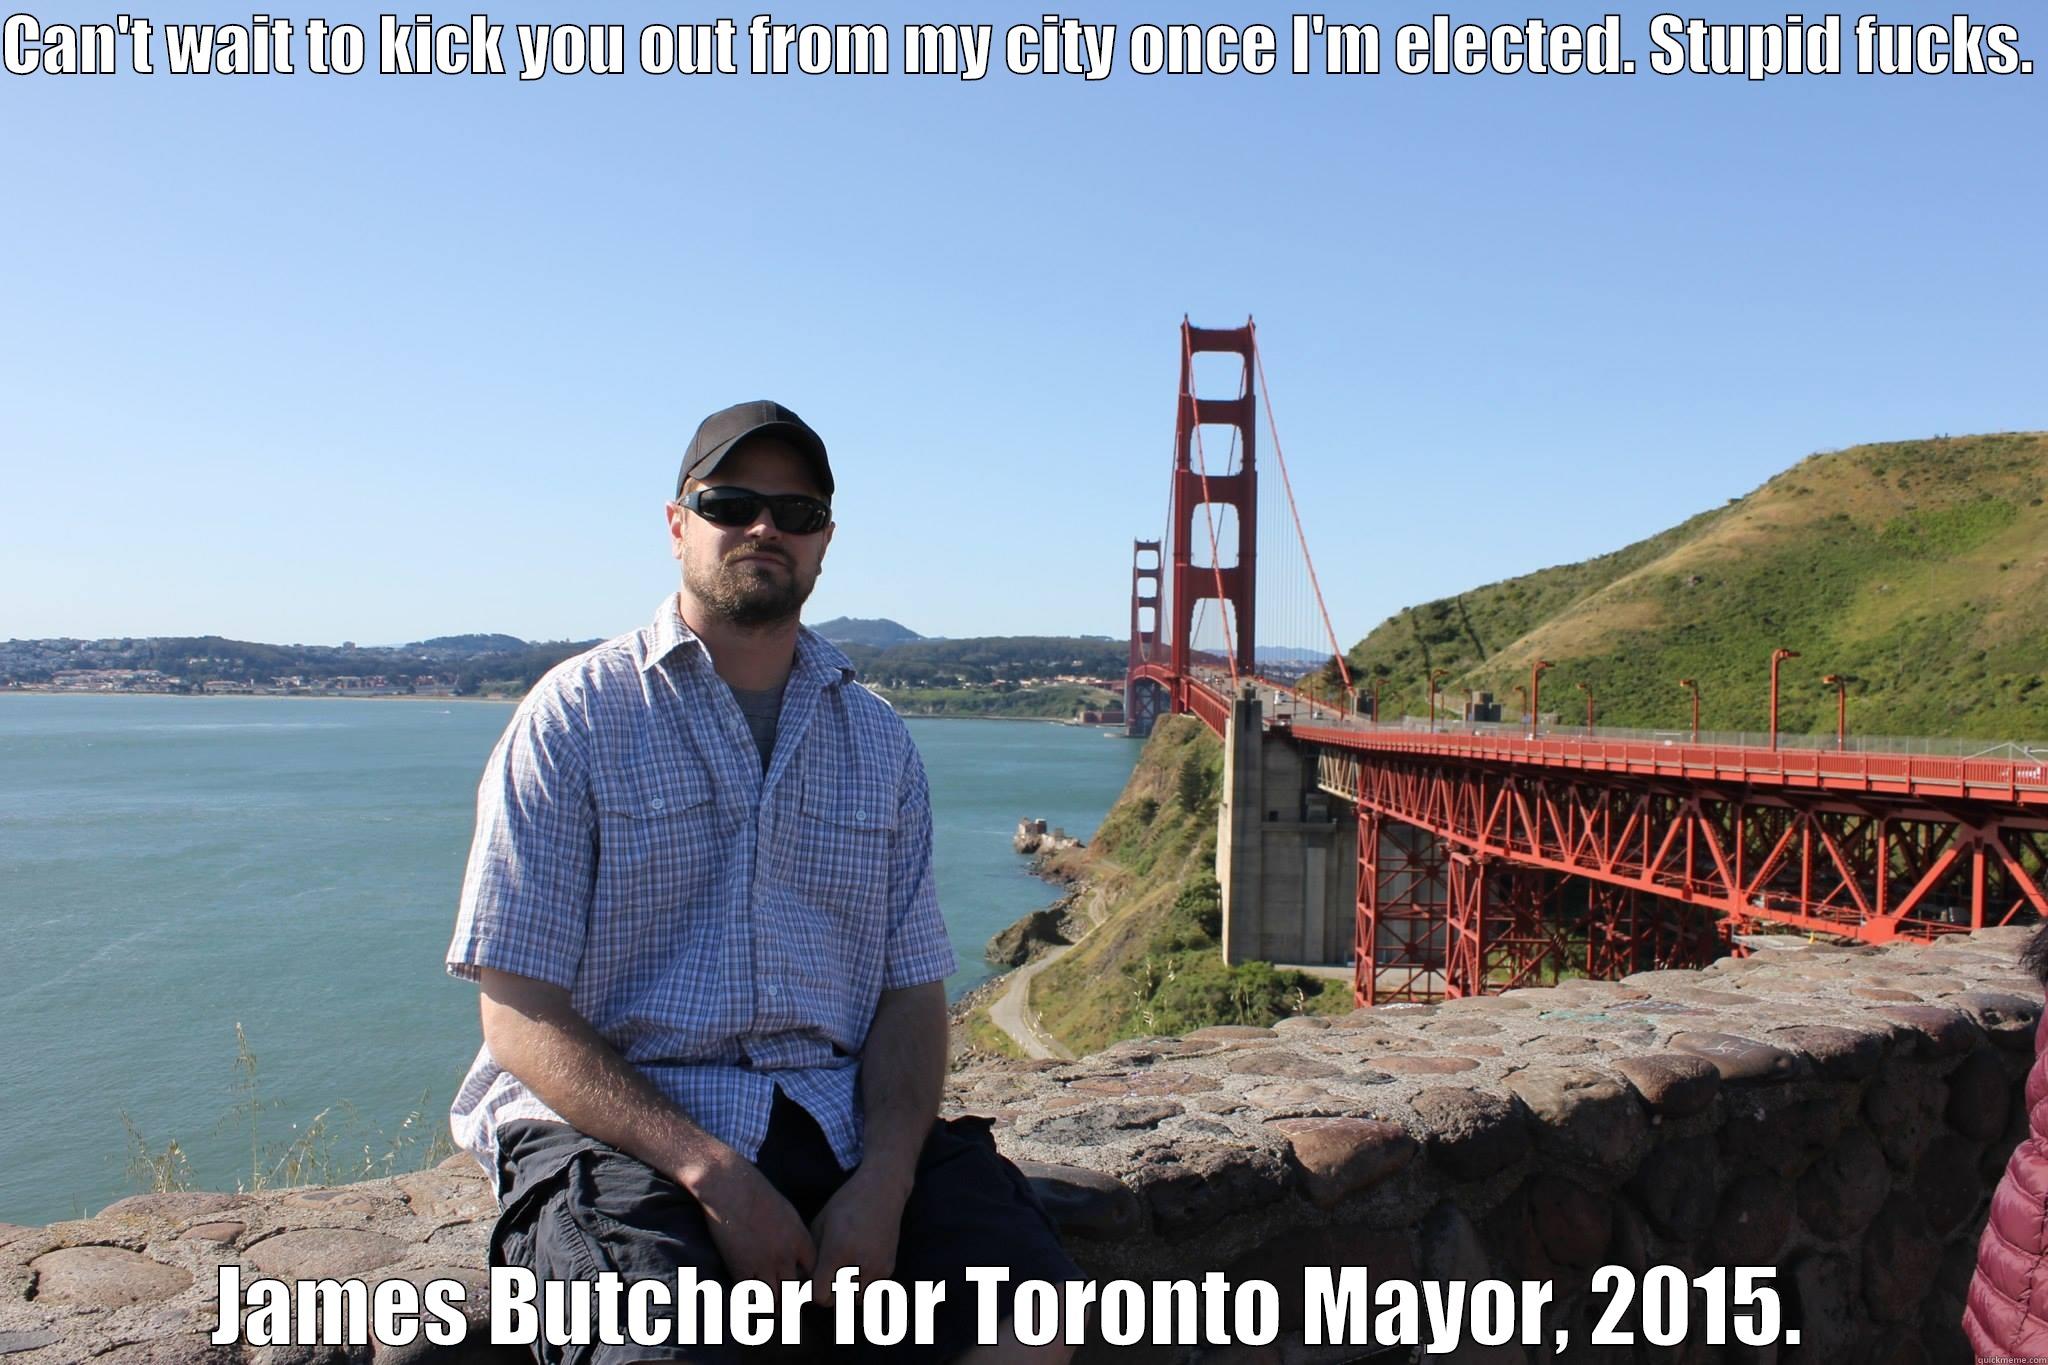 CAN'T WAIT TO KICK YOU OUT FROM MY CITY ONCE I'M ELECTED. STUPID FUCKS.  JAMES BUTCHER FOR TORONTO MAYOR, 2015.  Misc